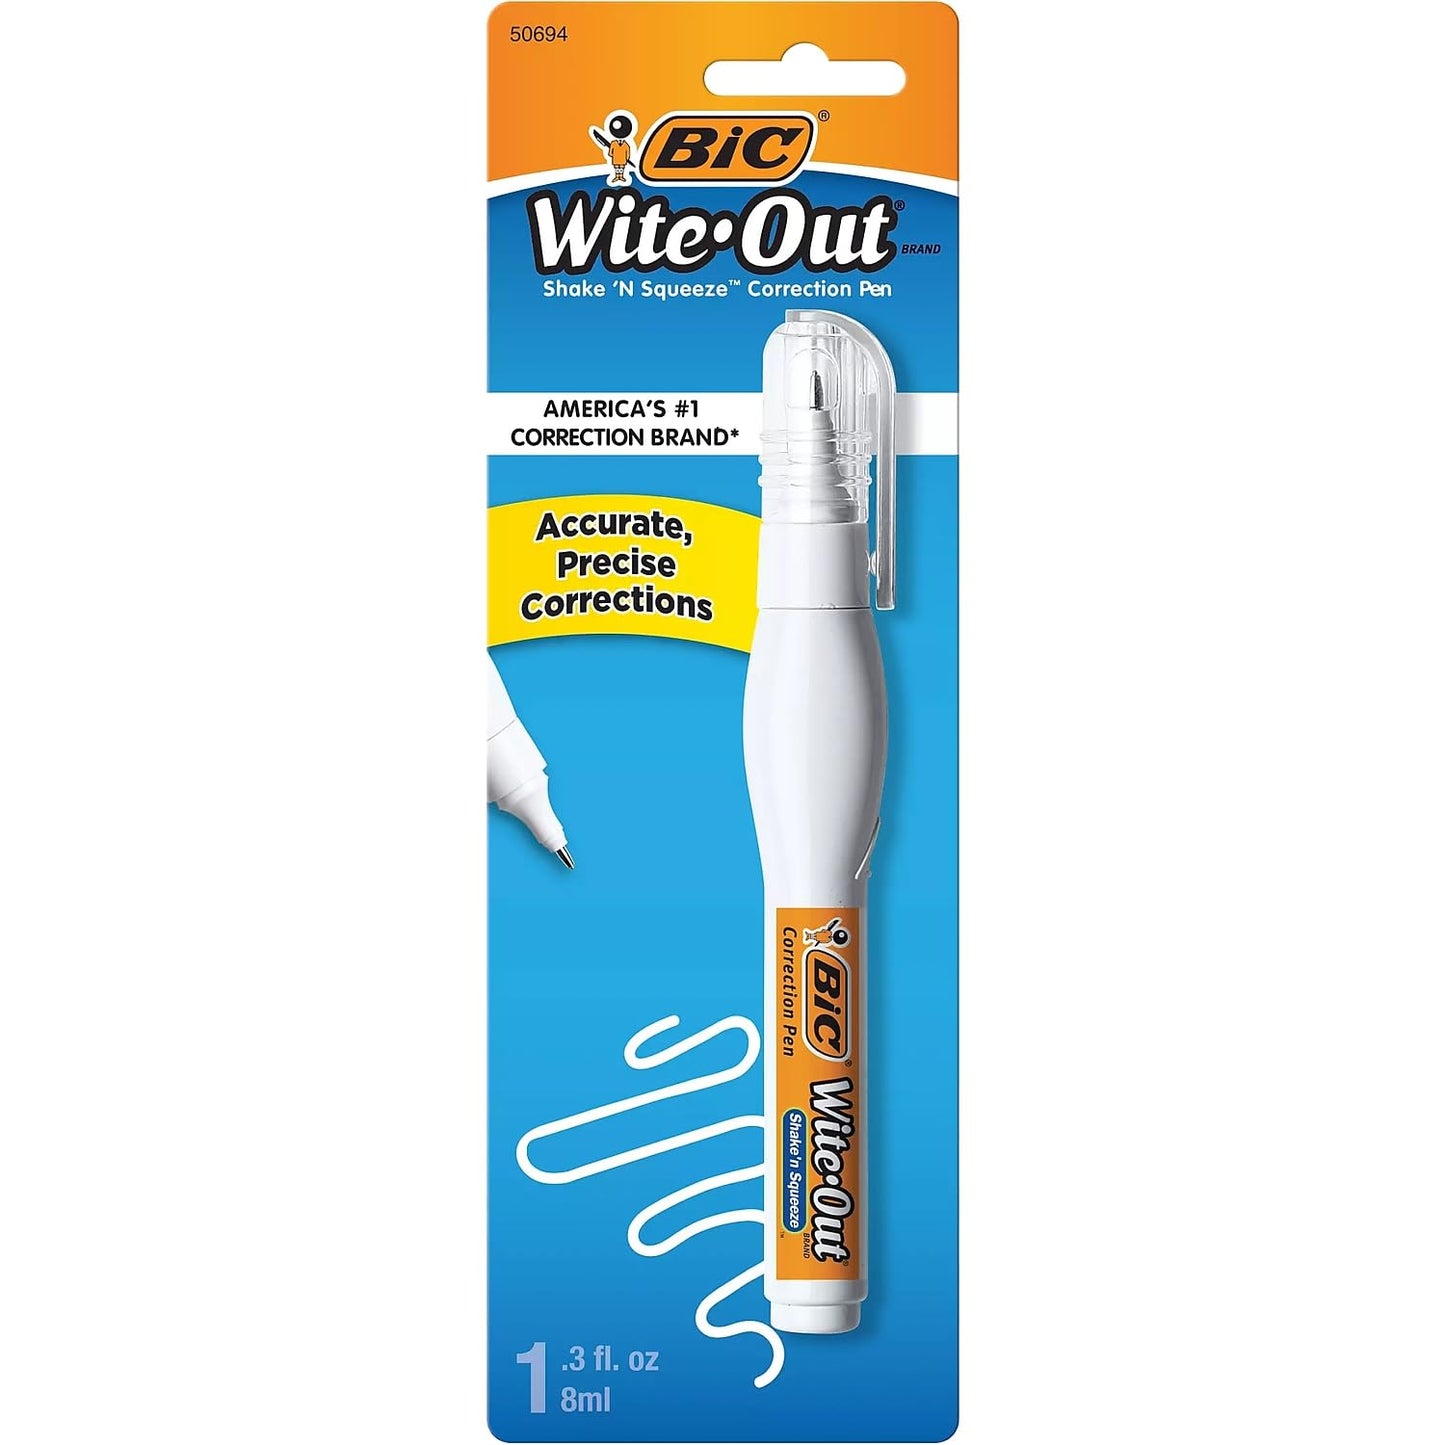 Bic WOSQPP11 Correction Pen Fast Drying Needlepoint Tip 8ml WE